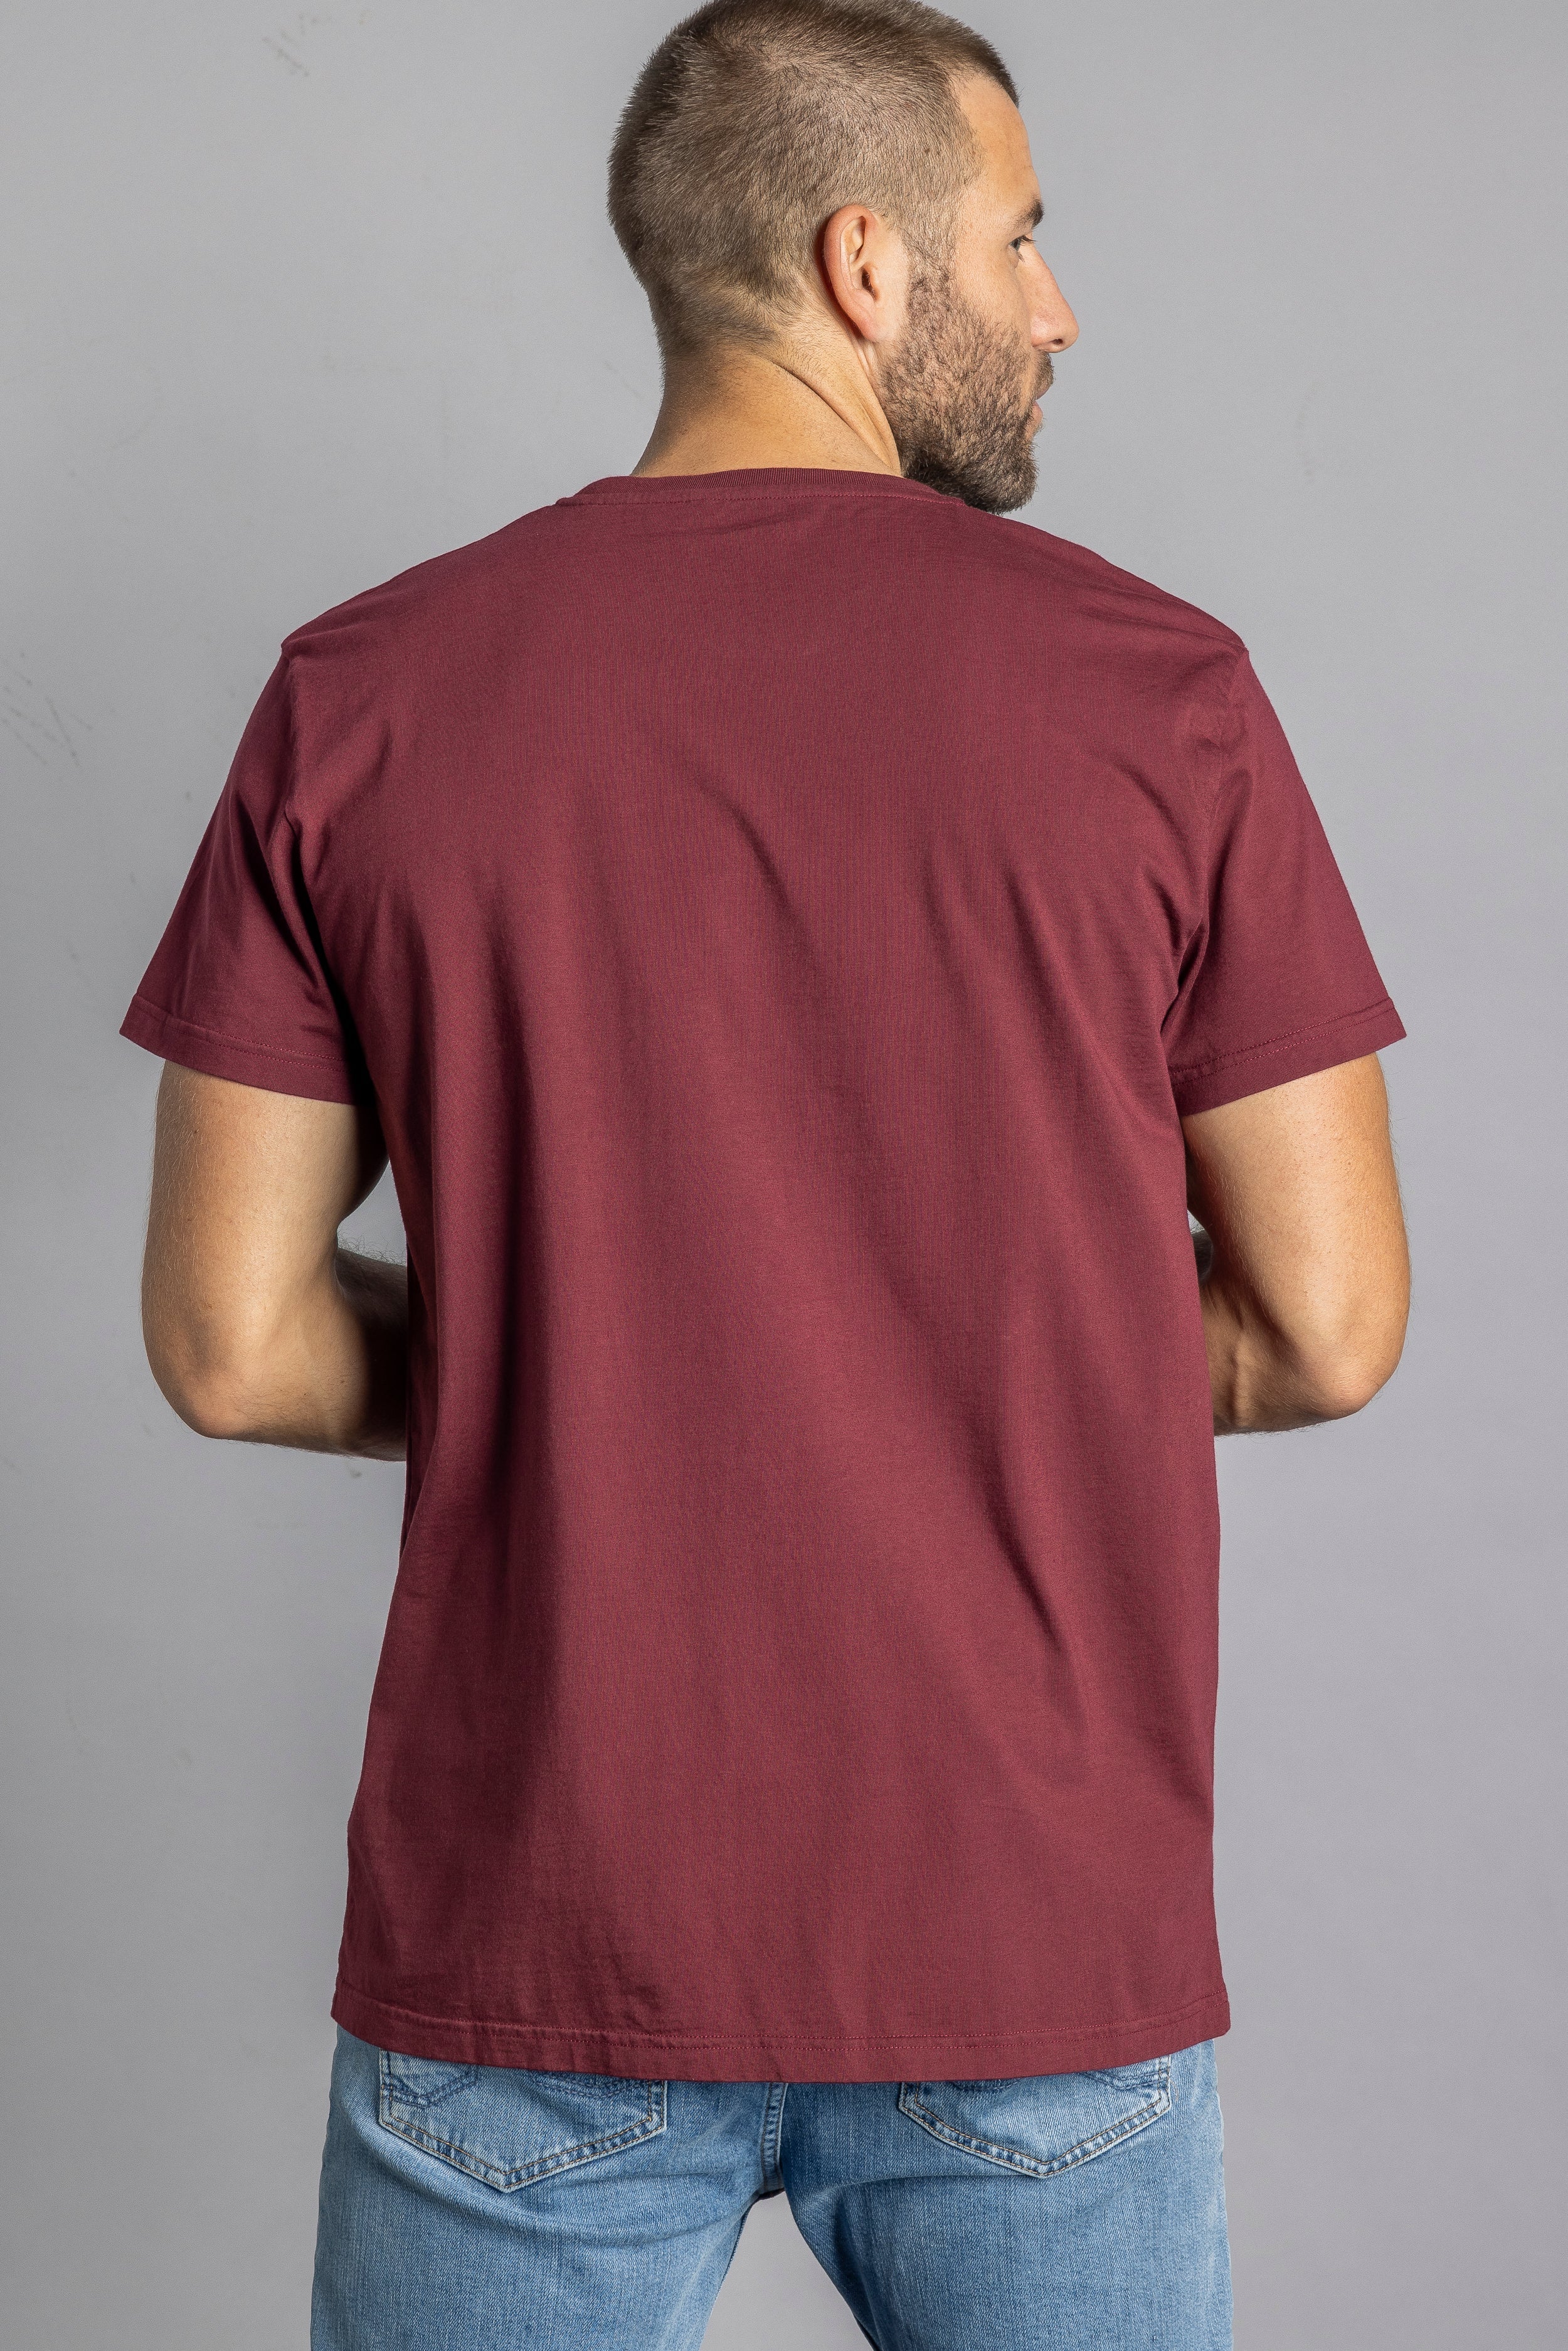 Dark red T-shirt Premium Blank Standard made from 100% organic cotton from DIRTS